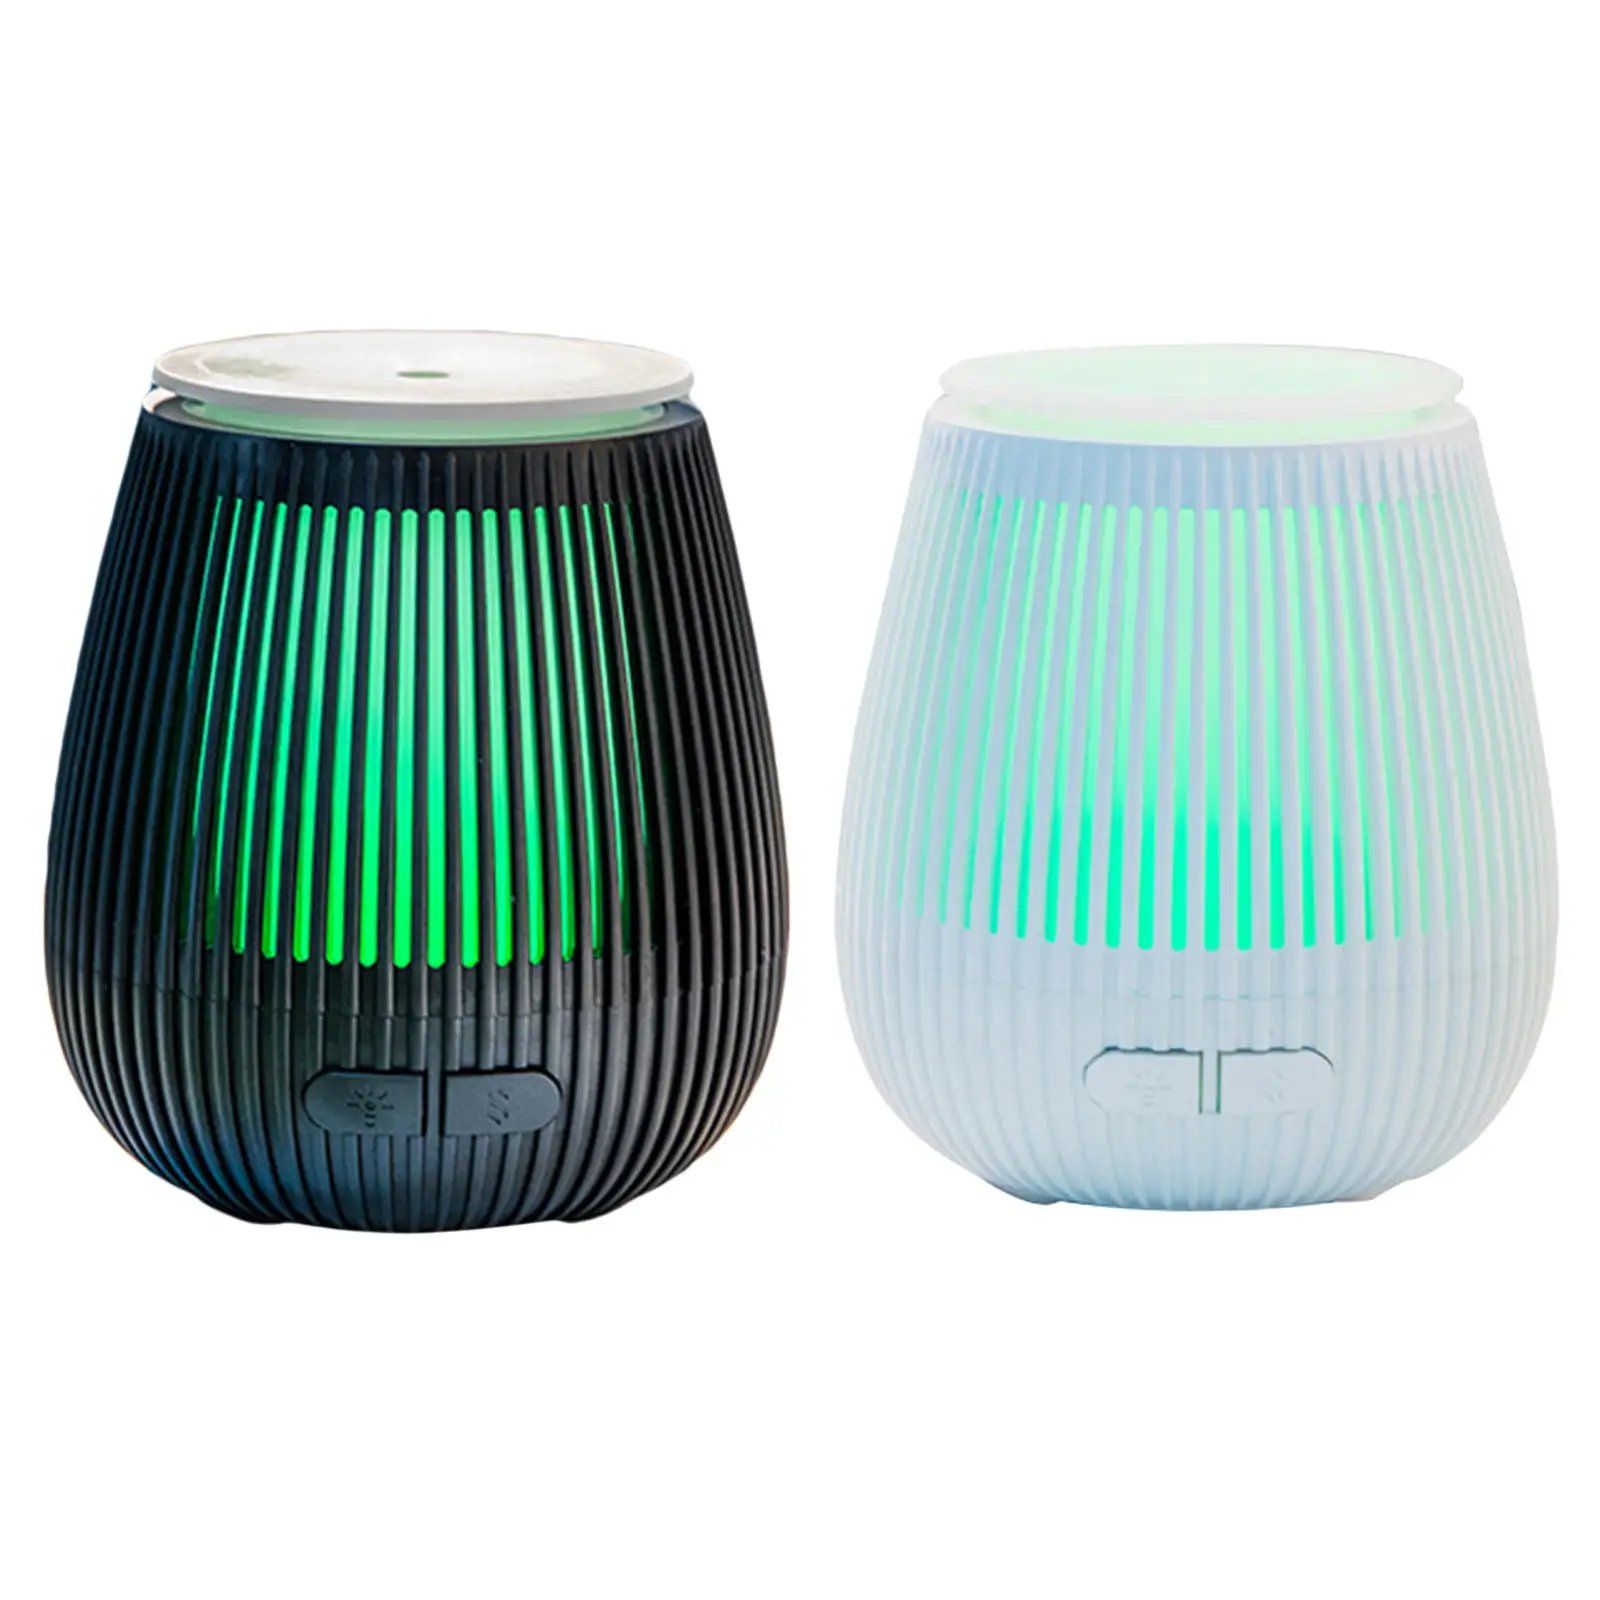 Mini Cool Mist Air Humidifier with Night Light Aroma Oil Diffuser Quite for Car Home Bedroom Office Baby Room